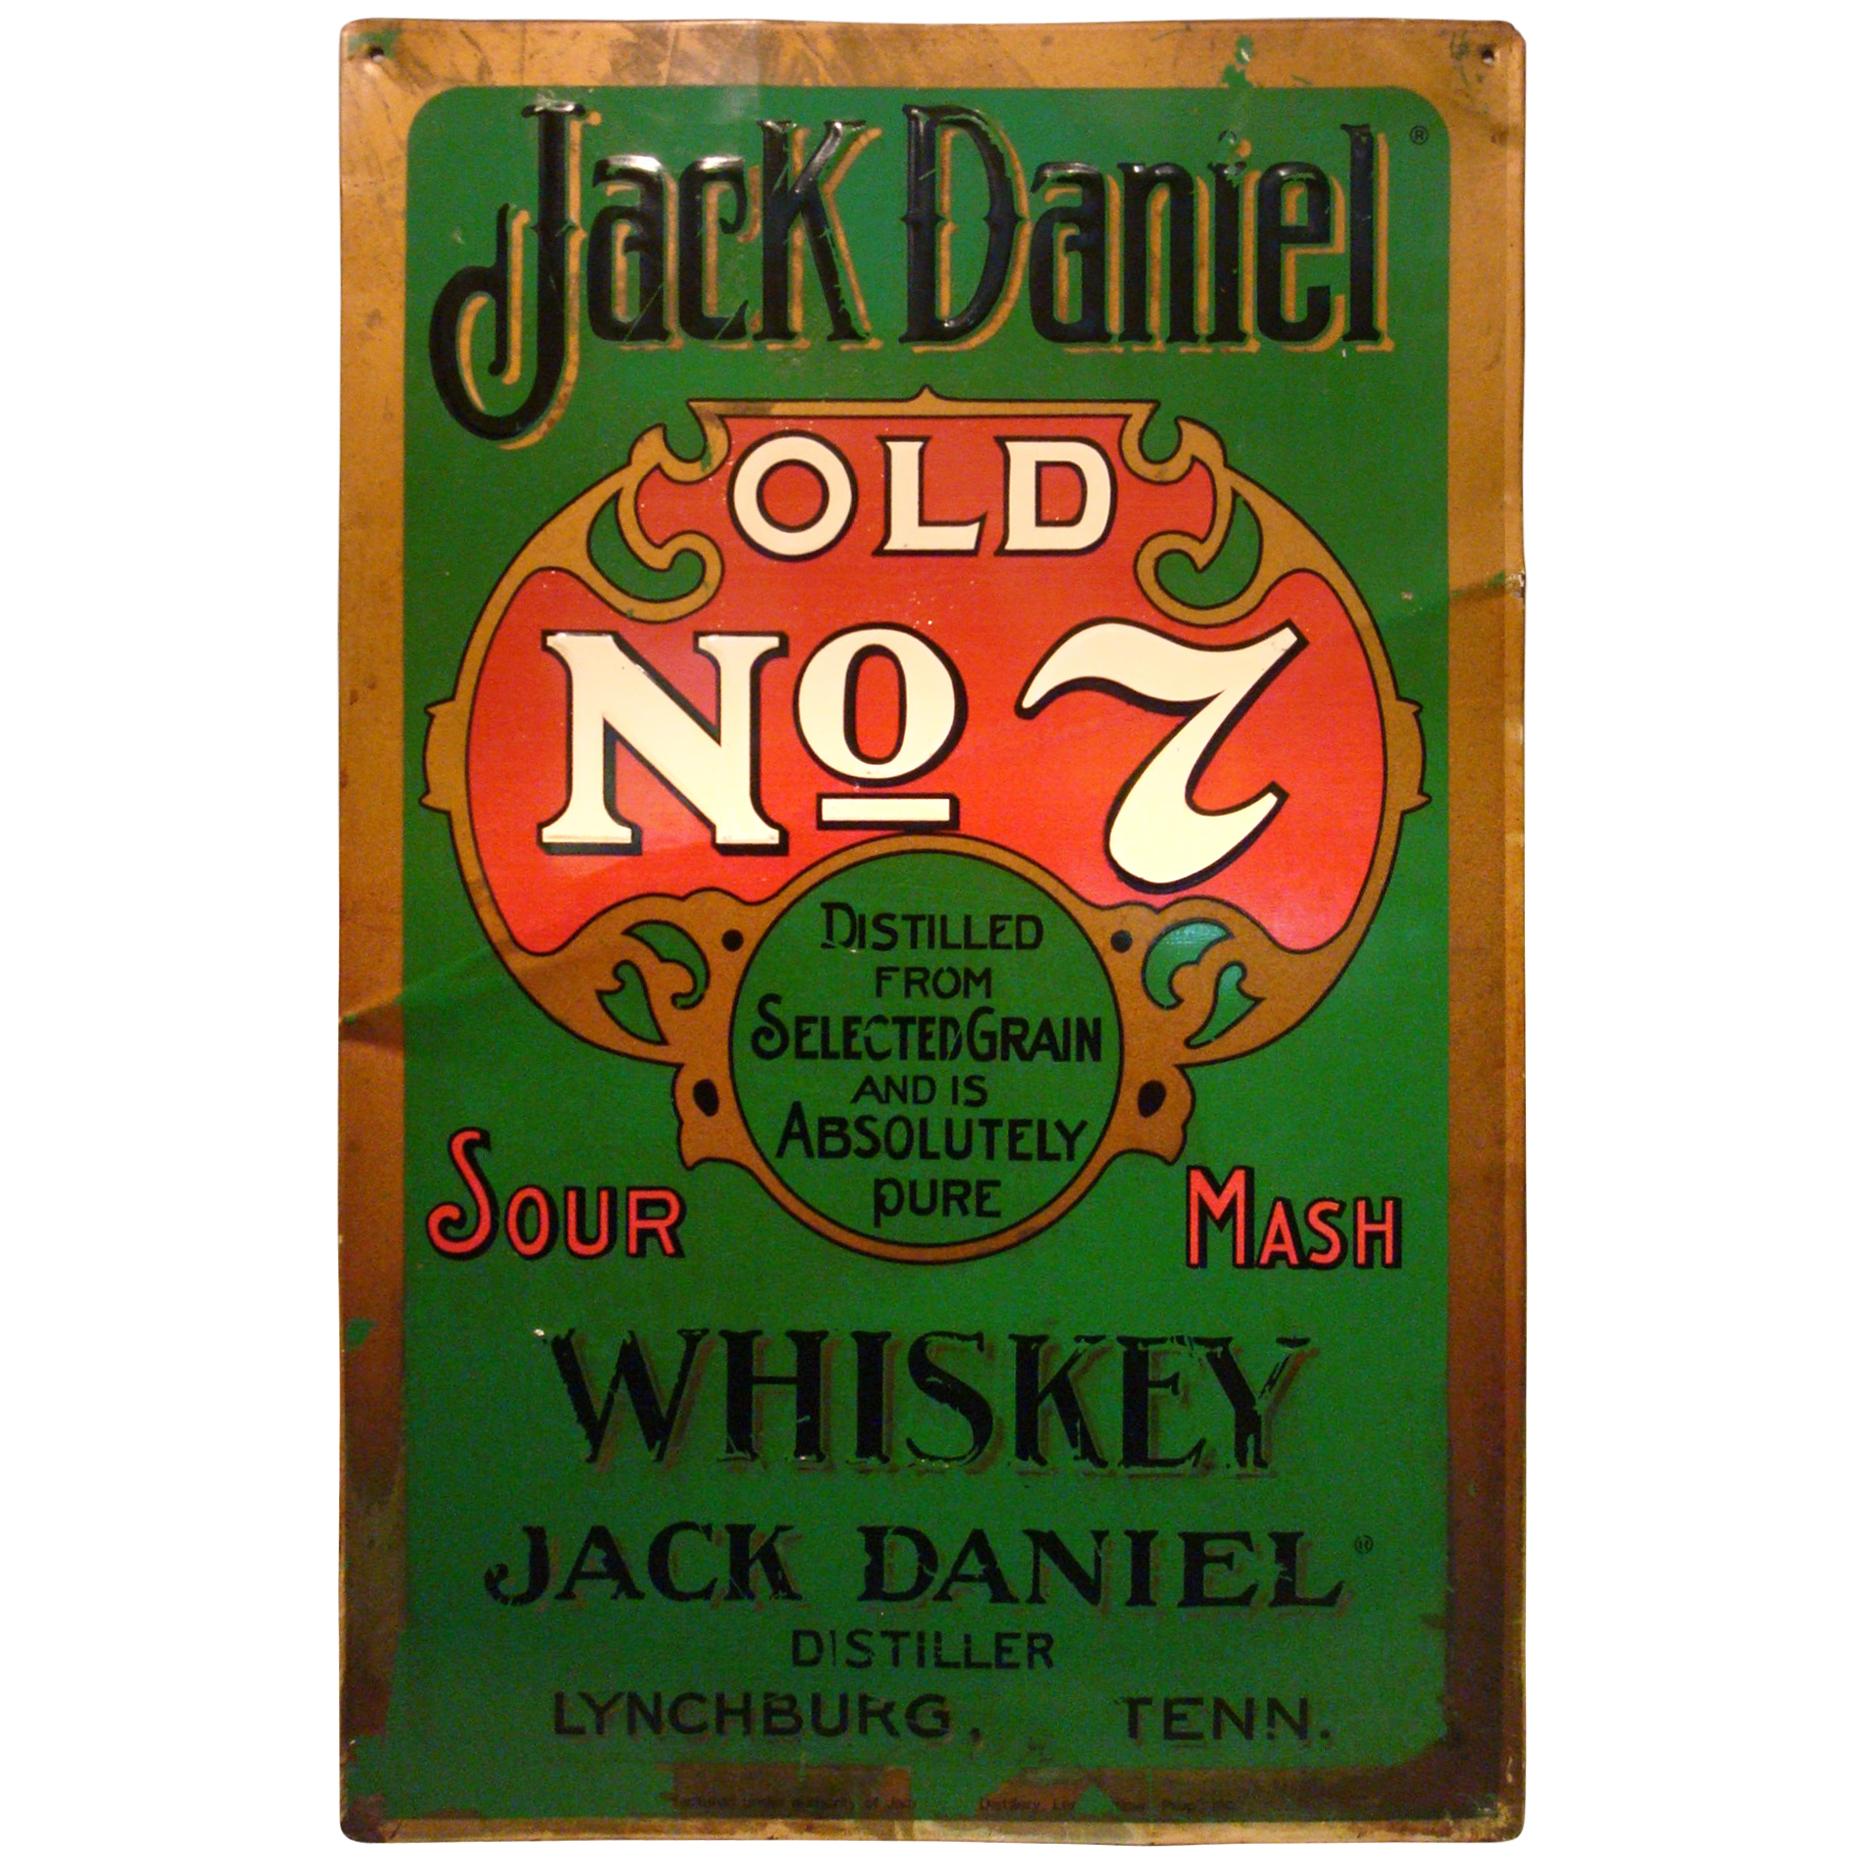 Jack Daniels Old Number 7 Whiskey Tin Advertising Bar Sign / 1950s Midcentury